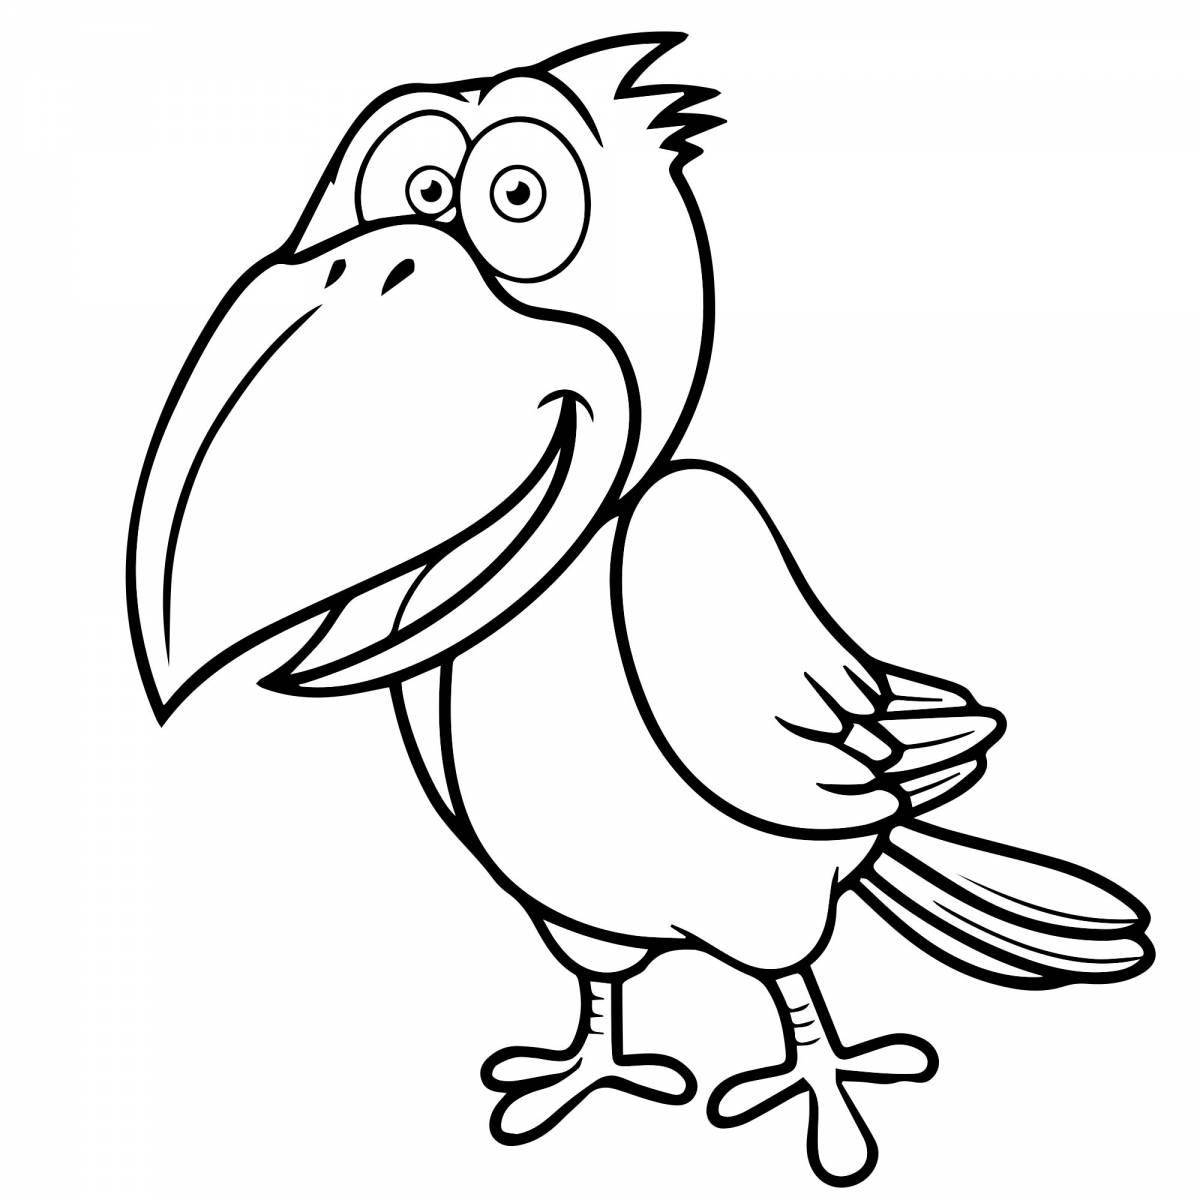 Coloring book friendly crow for children 6-7 years old